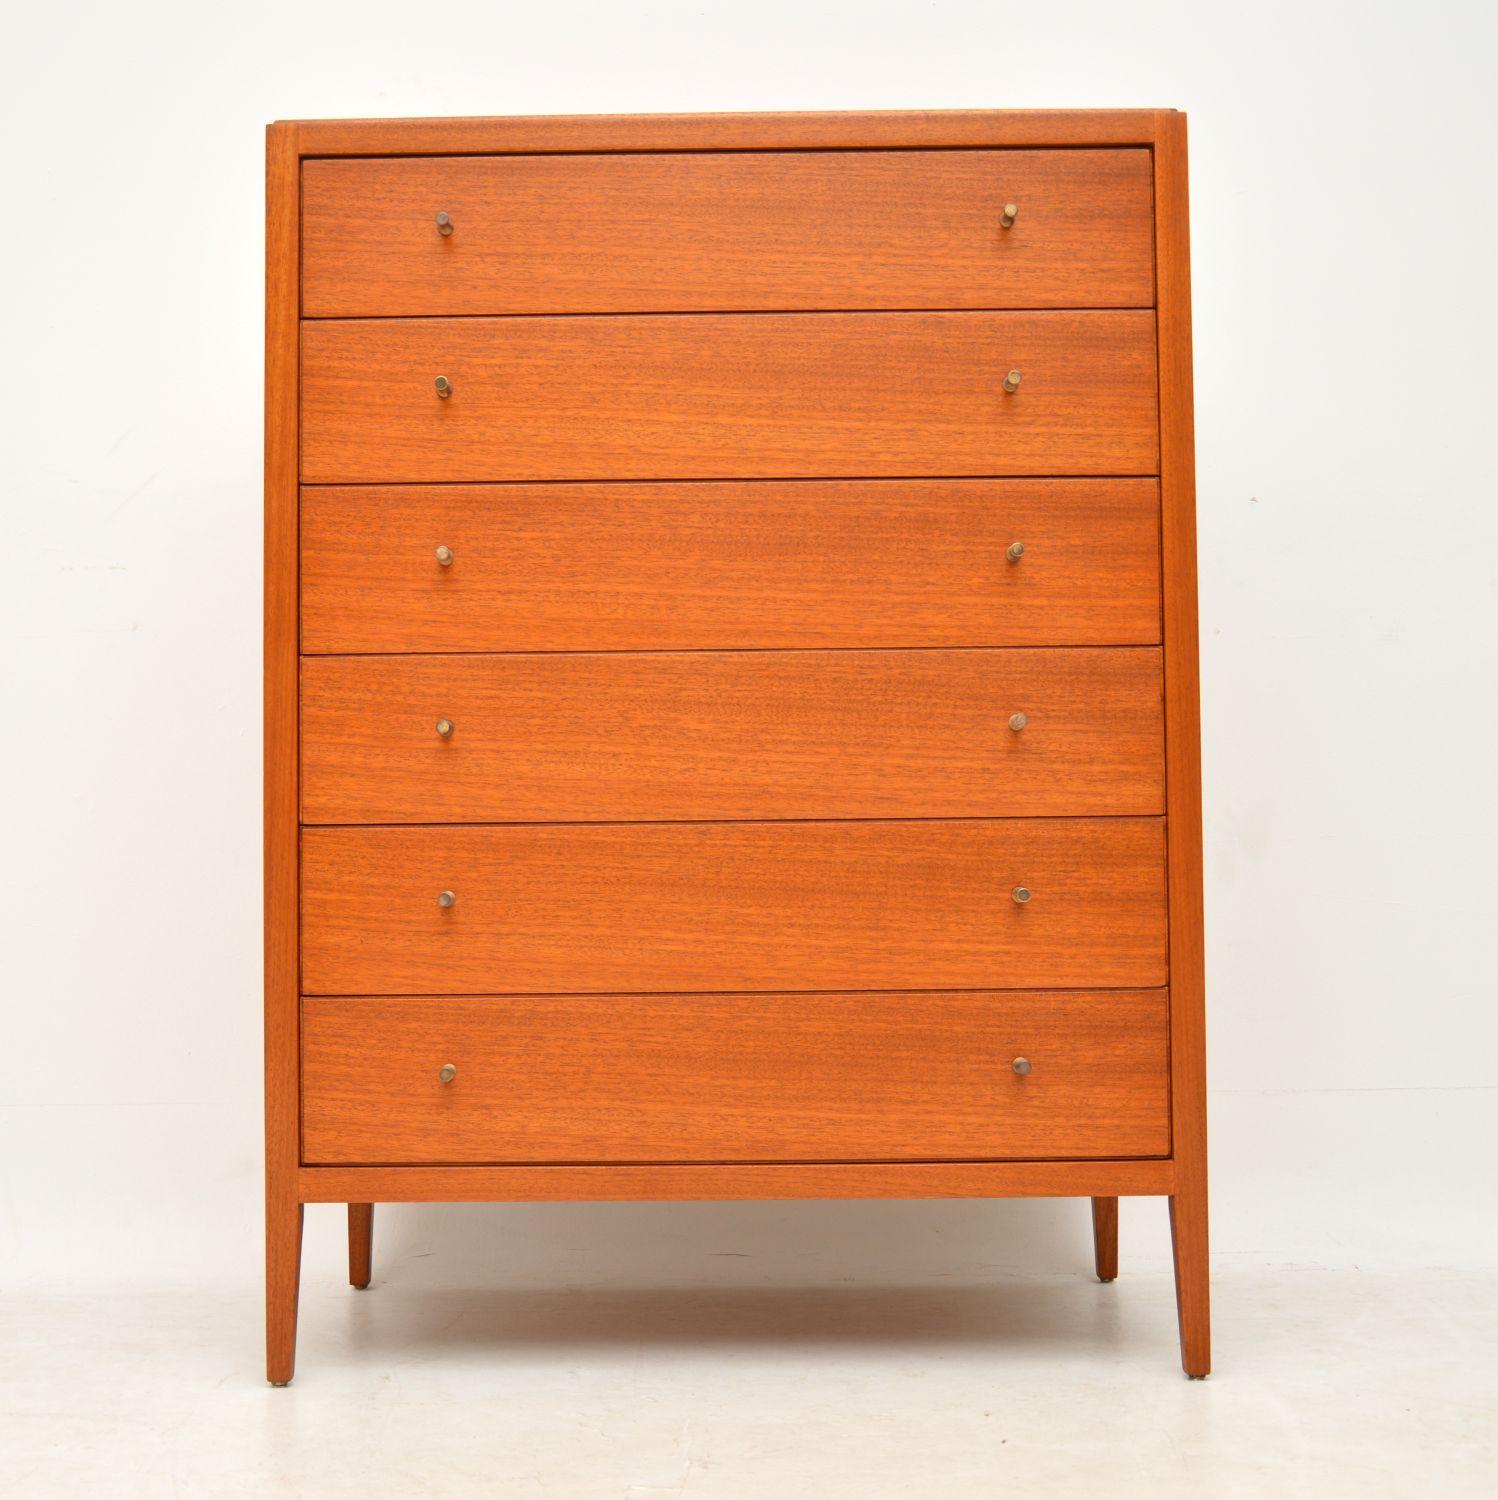 A beautifully made vintage tall boy chest of drawers in mahogany, this dates from the 1960s. It was made by Loughborough furniture, a little known and very underrated British manufacturer. The design and quality are amazing, the mahogany has a